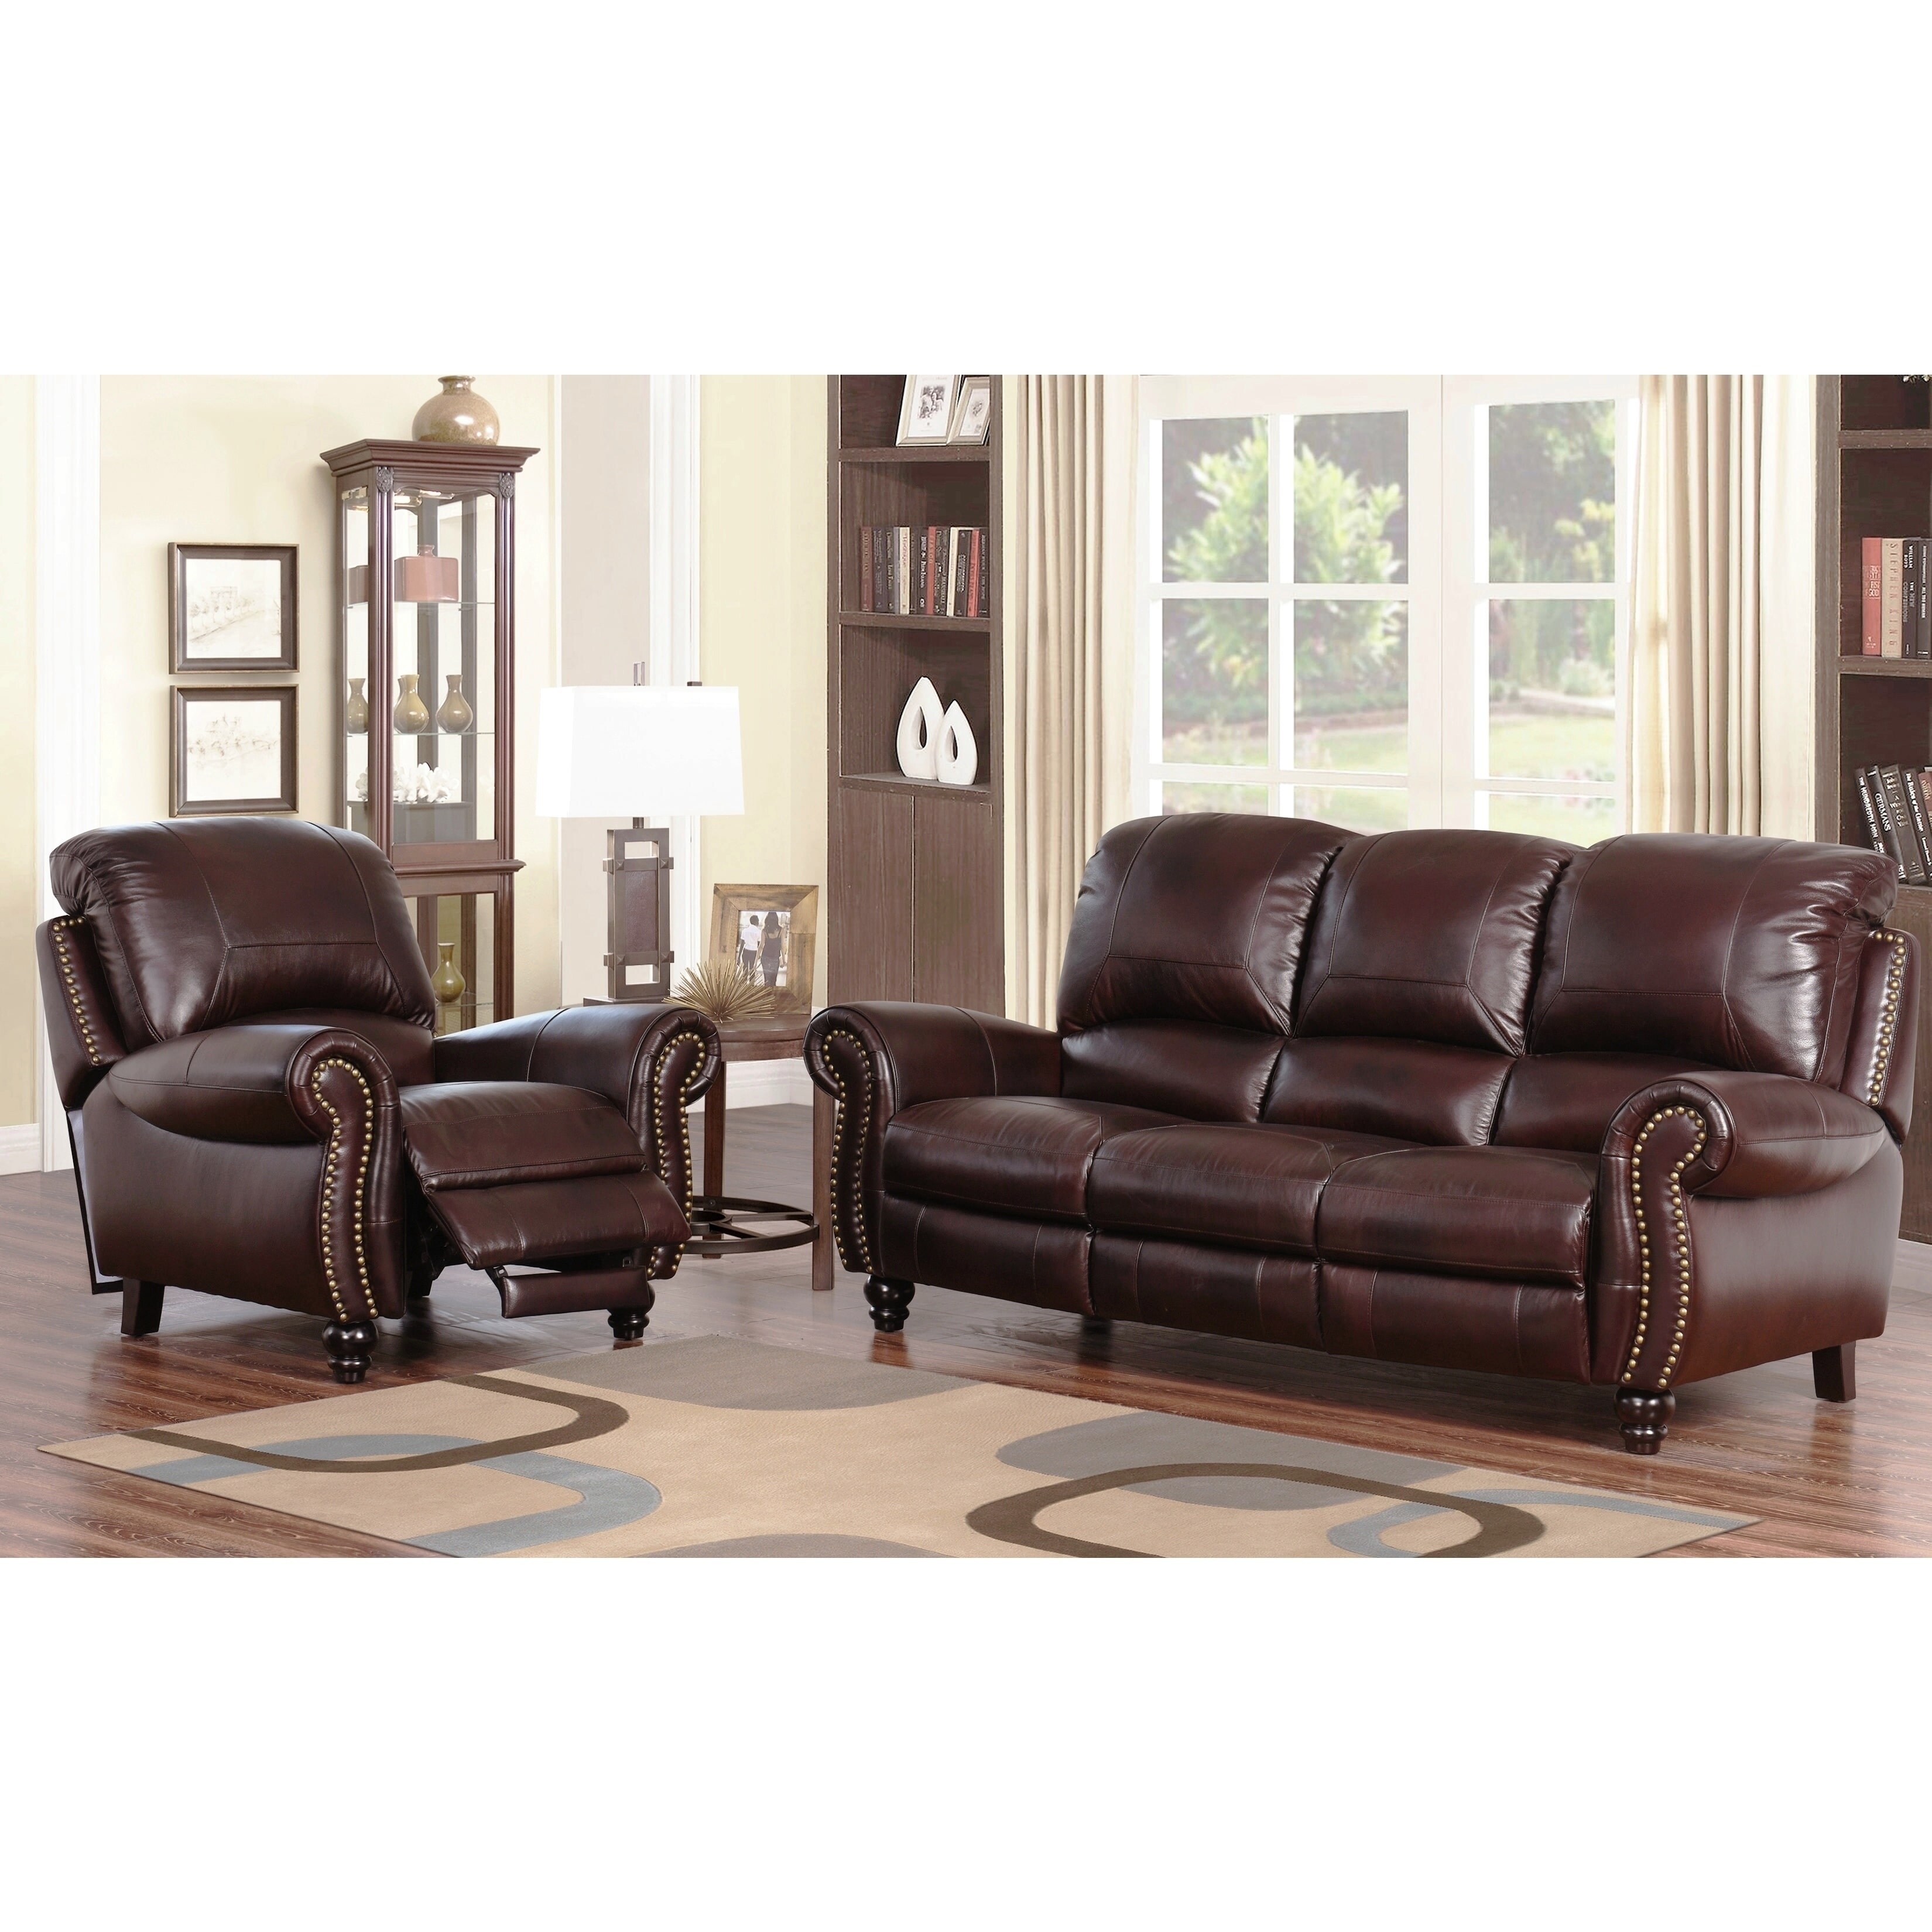 Abbyson Living Madison Premium Top grain Leather Pushback Reclining Sofa And Armchair